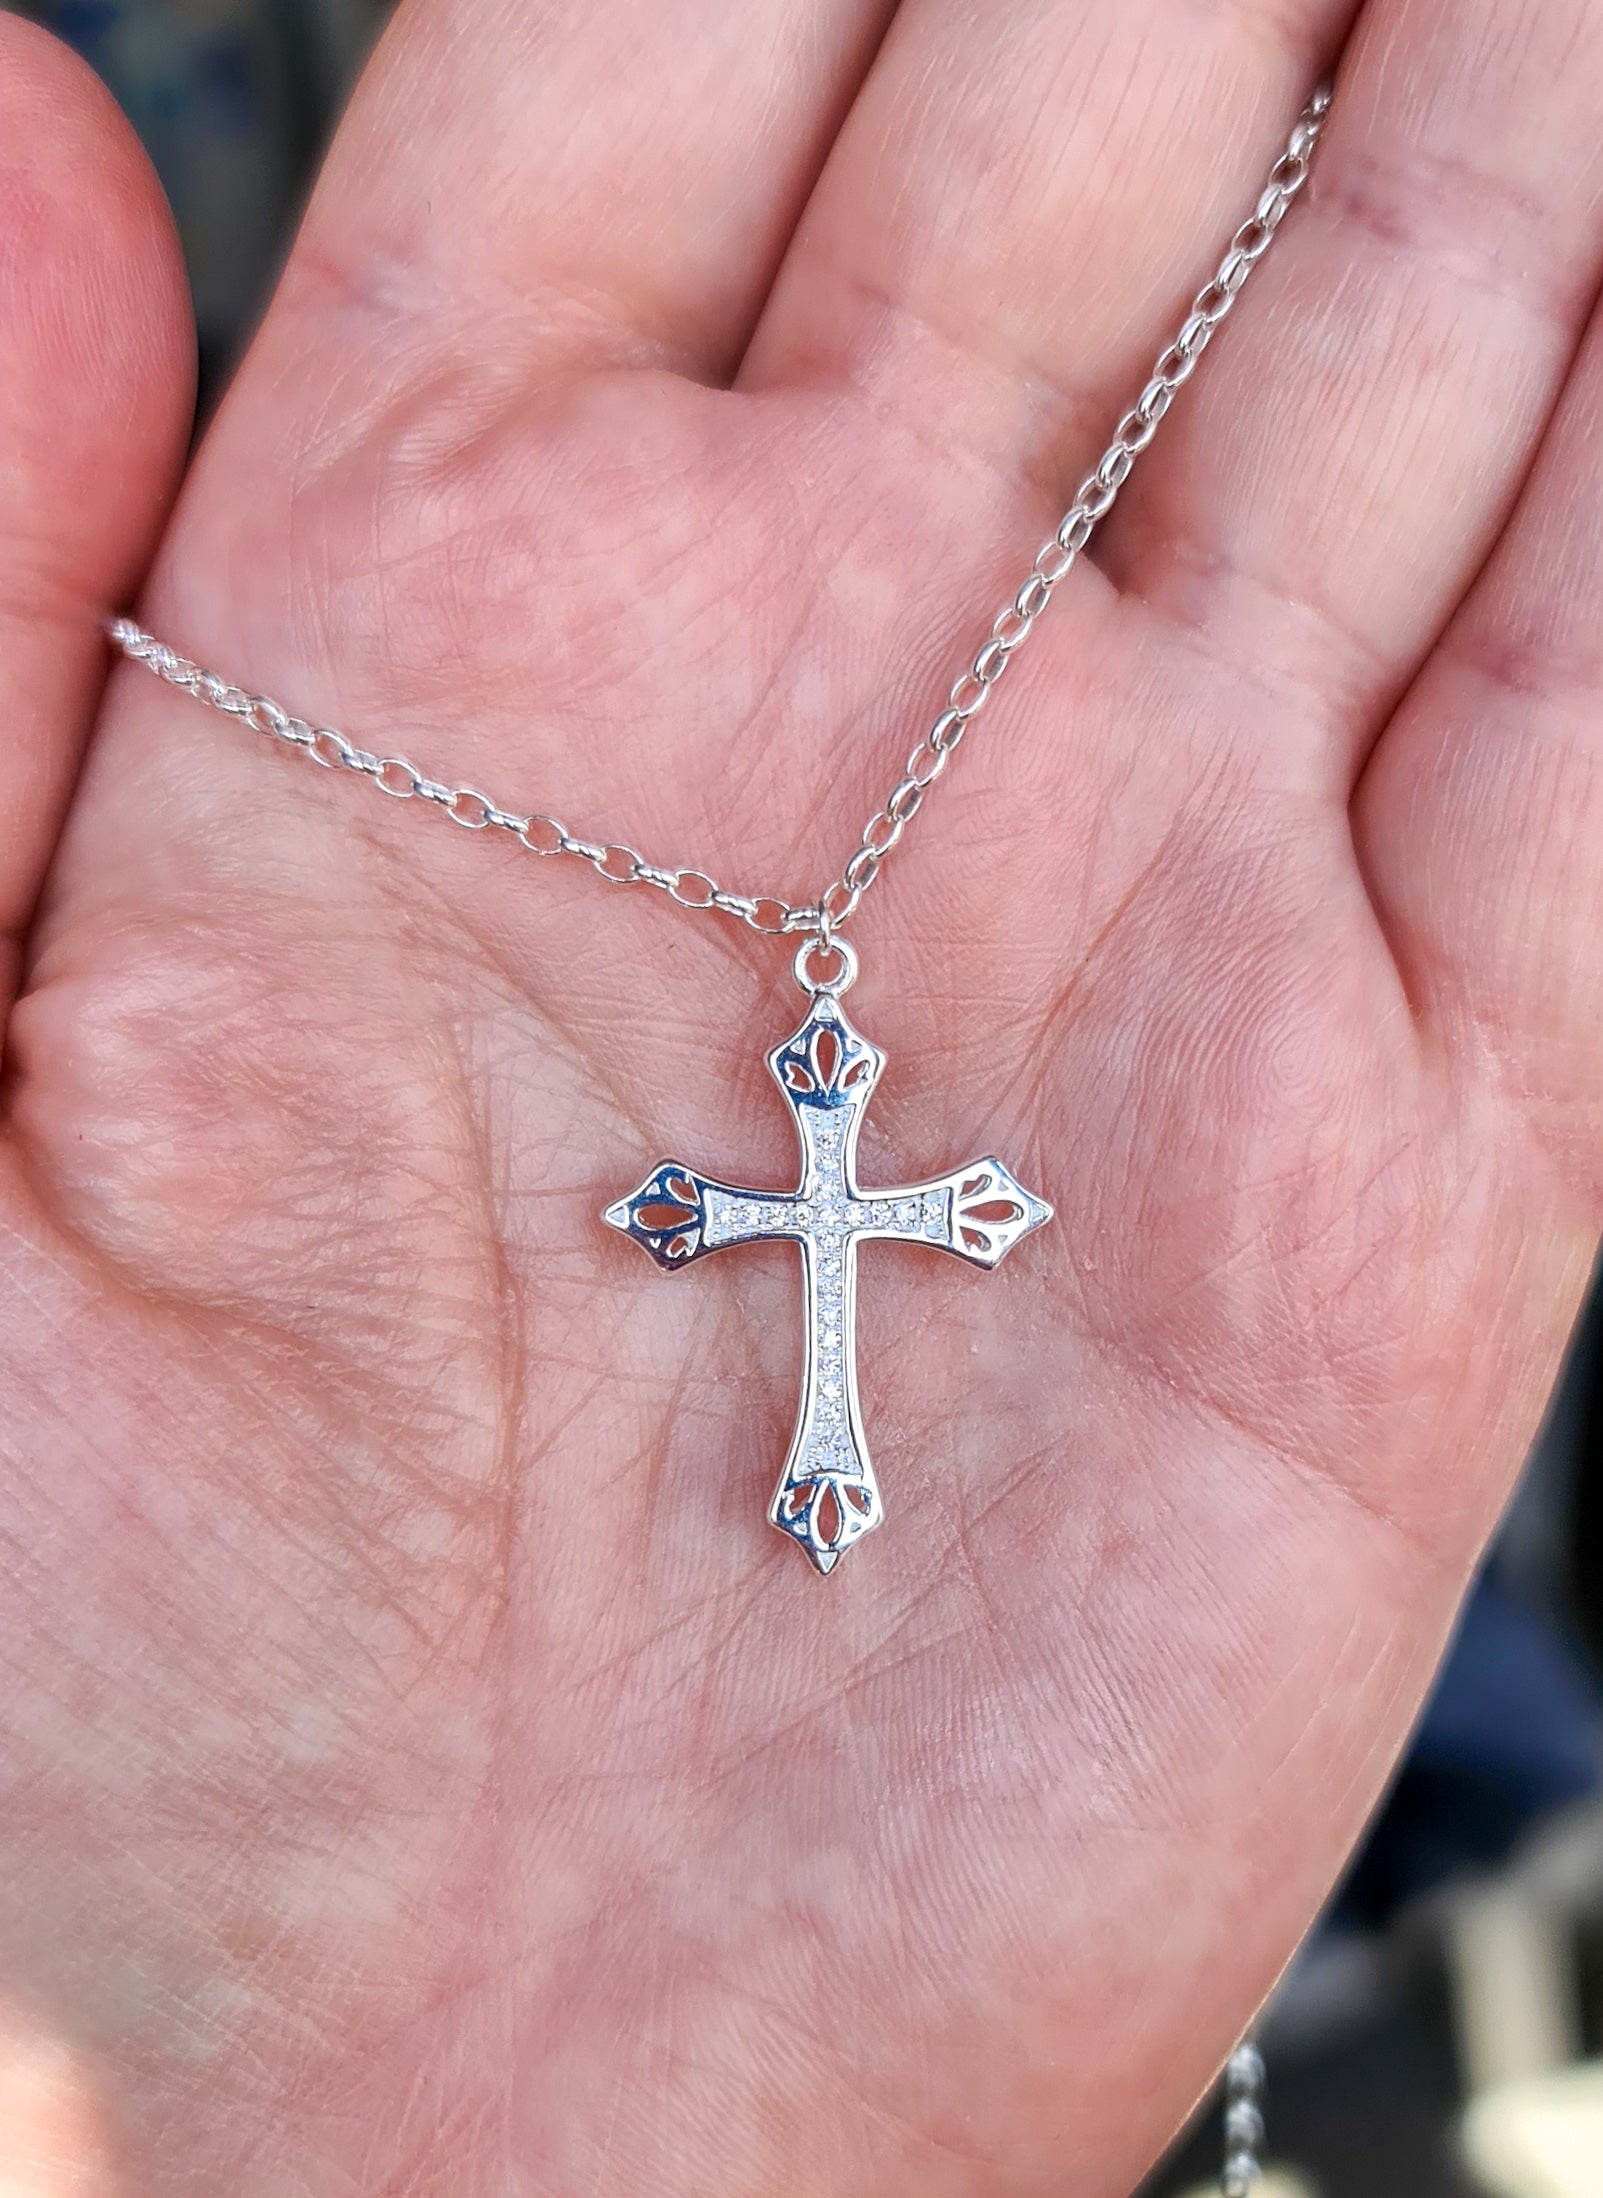 A sterling silver 925 necklace with a large silver cross pendant with small encrusted crystals for Irish communion or confirmation gifts for girls in Ireland.